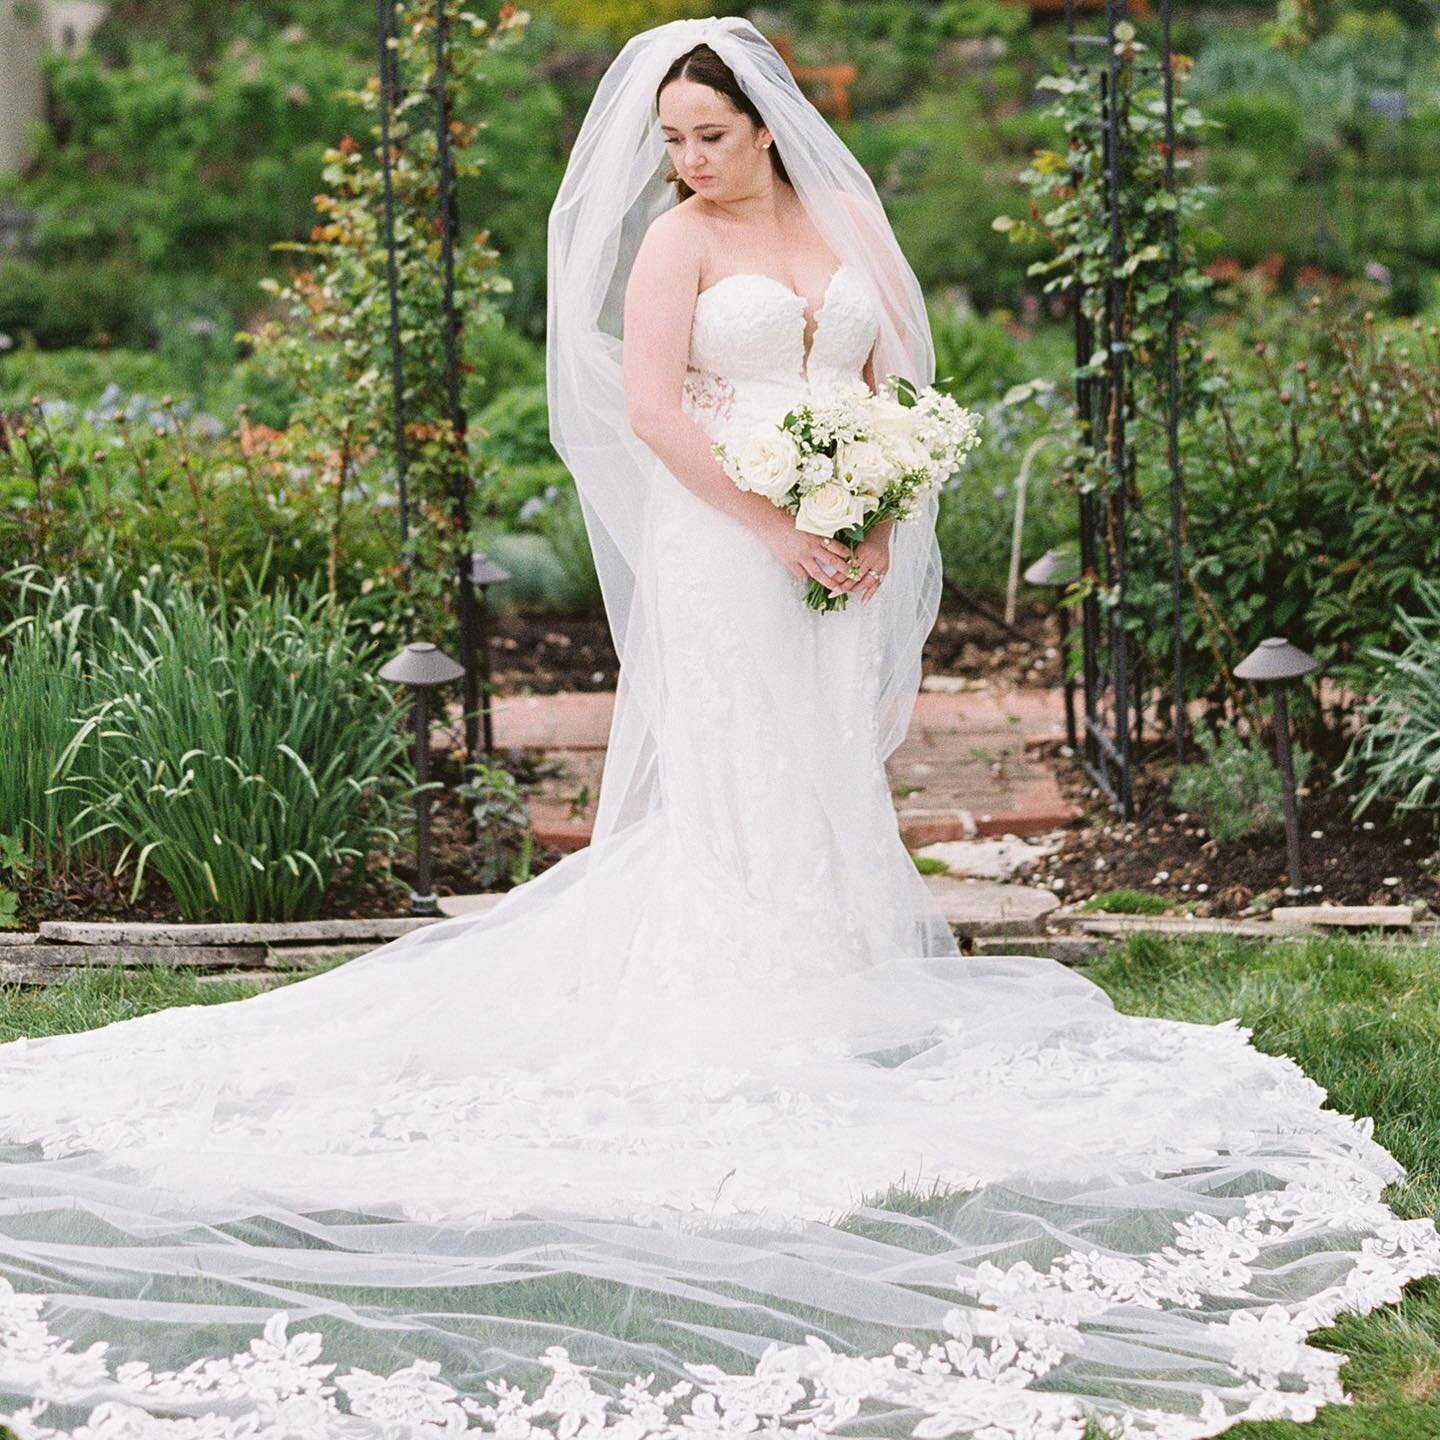 Classic: the white bouquet, the veil, the venue, the Bride.

Planning and Design: @jeannenelillieevents 
Photography: @kellysweetphoto 
Floral Design: @florarae_ 
Venue: @thewarmemorial